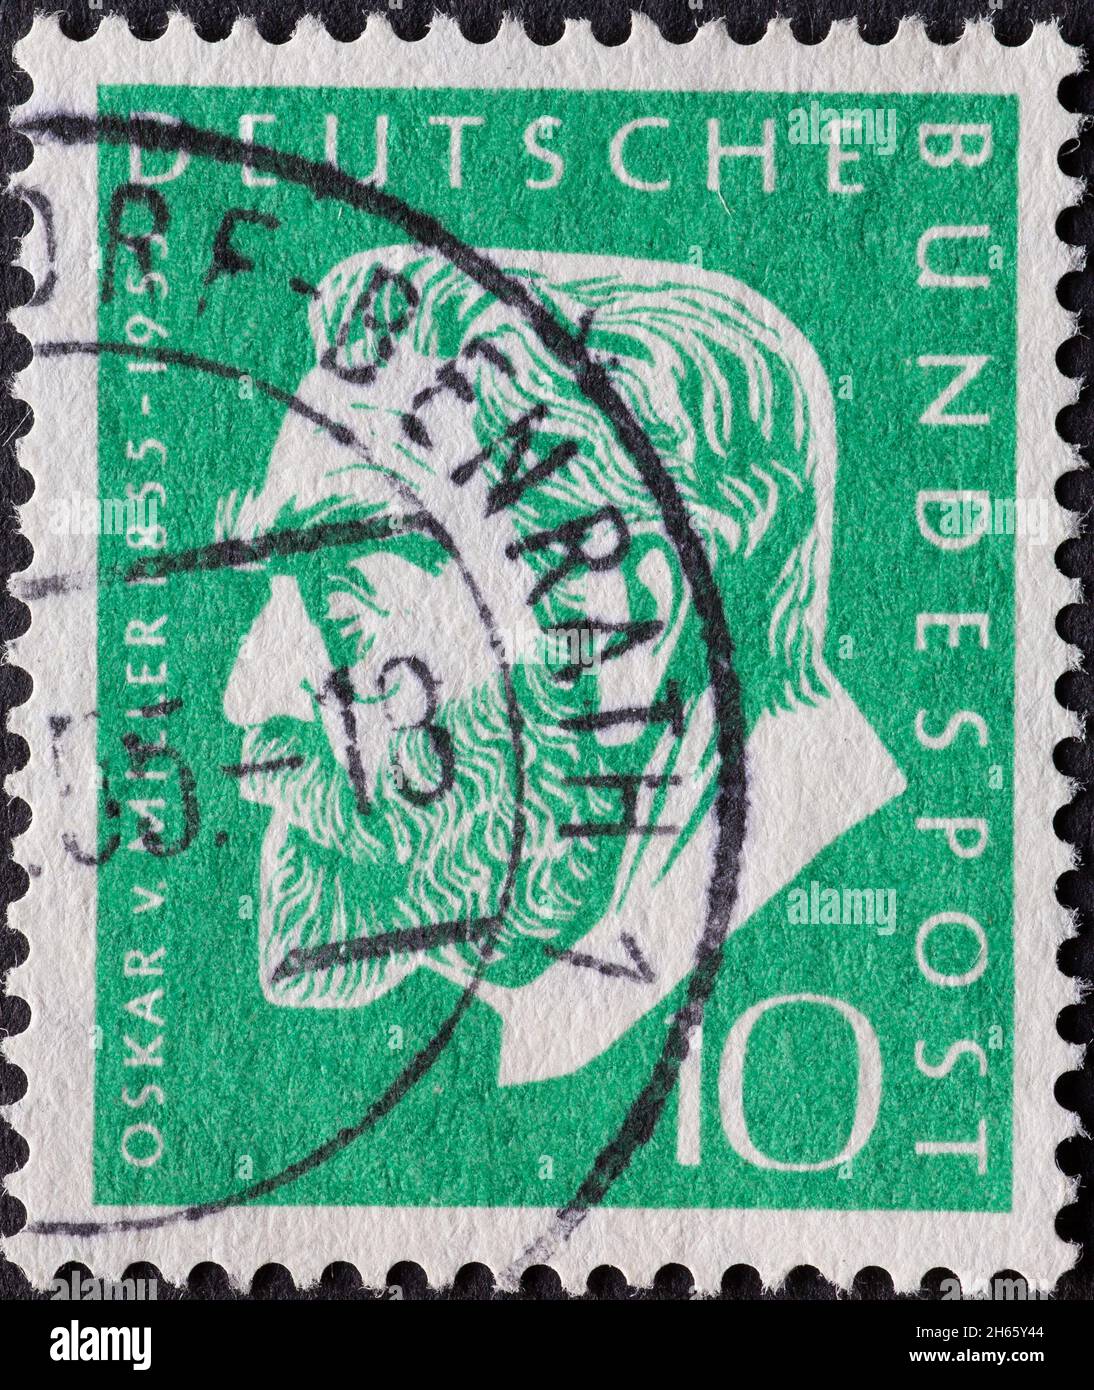 GERMANY - CIRCA 1955: this postage stamp shows a protrait by Oskar von Miller on the occasion of his 100th birthday, circa 1955 Stock Photo